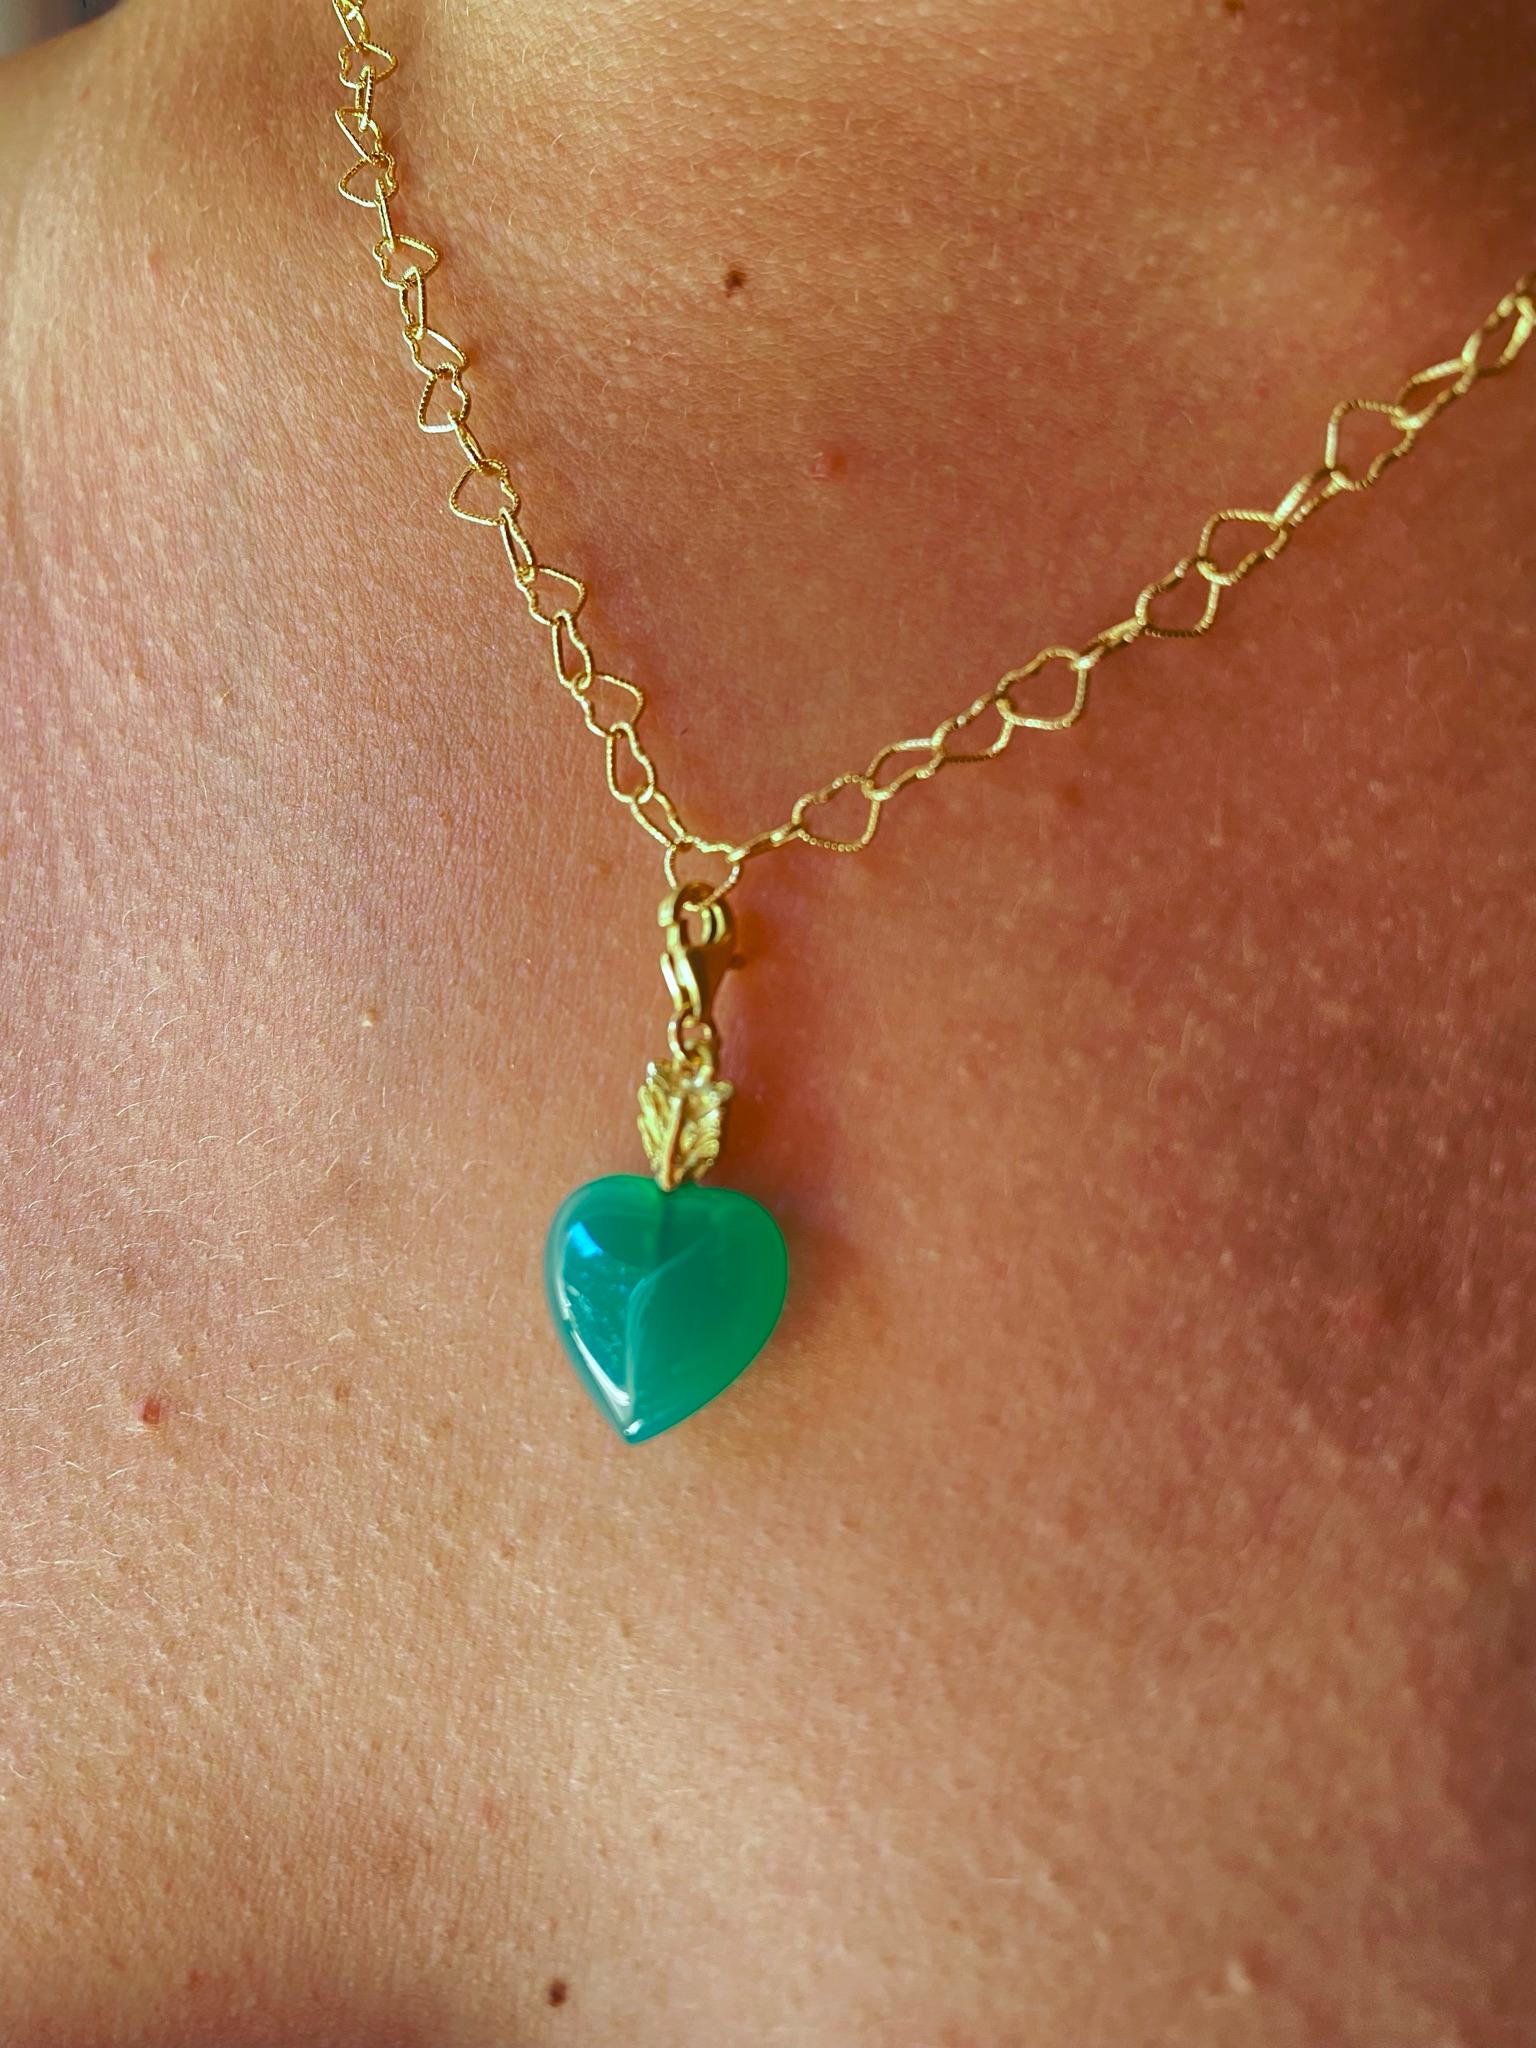 Rossella Ugolini Design Collection a nice pendant handcrafted in 18 karats gold adorned with beautiful deep green Heart shaped Agate. Green is the color of joy, it is lively ! This charm represents a hymn to the joy of love we feel.
For sale as a